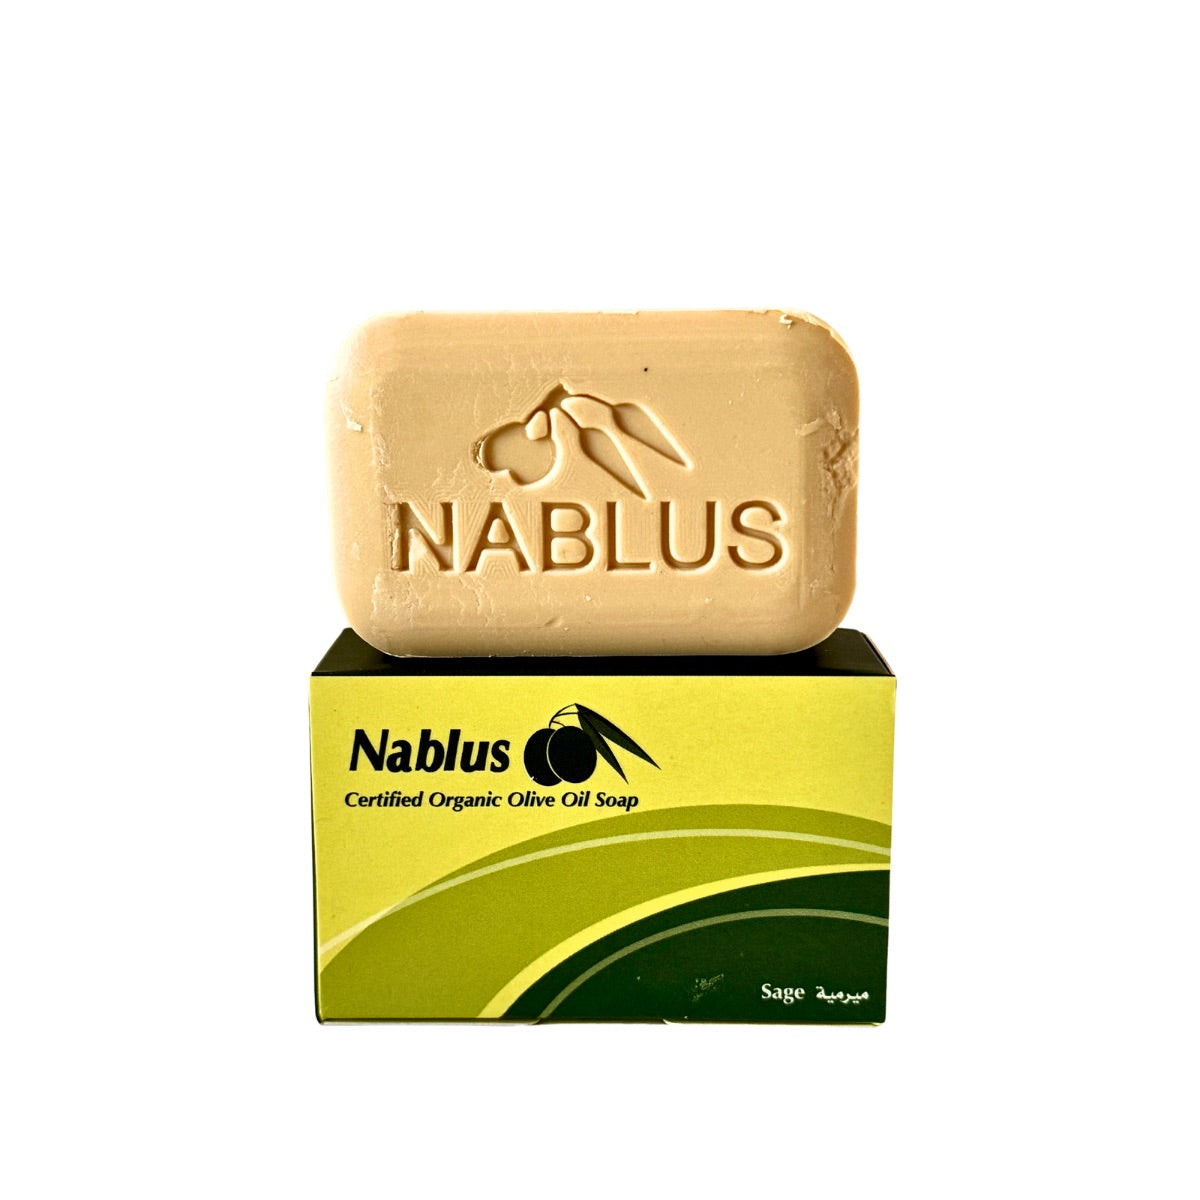 Scented Soap from Nablus